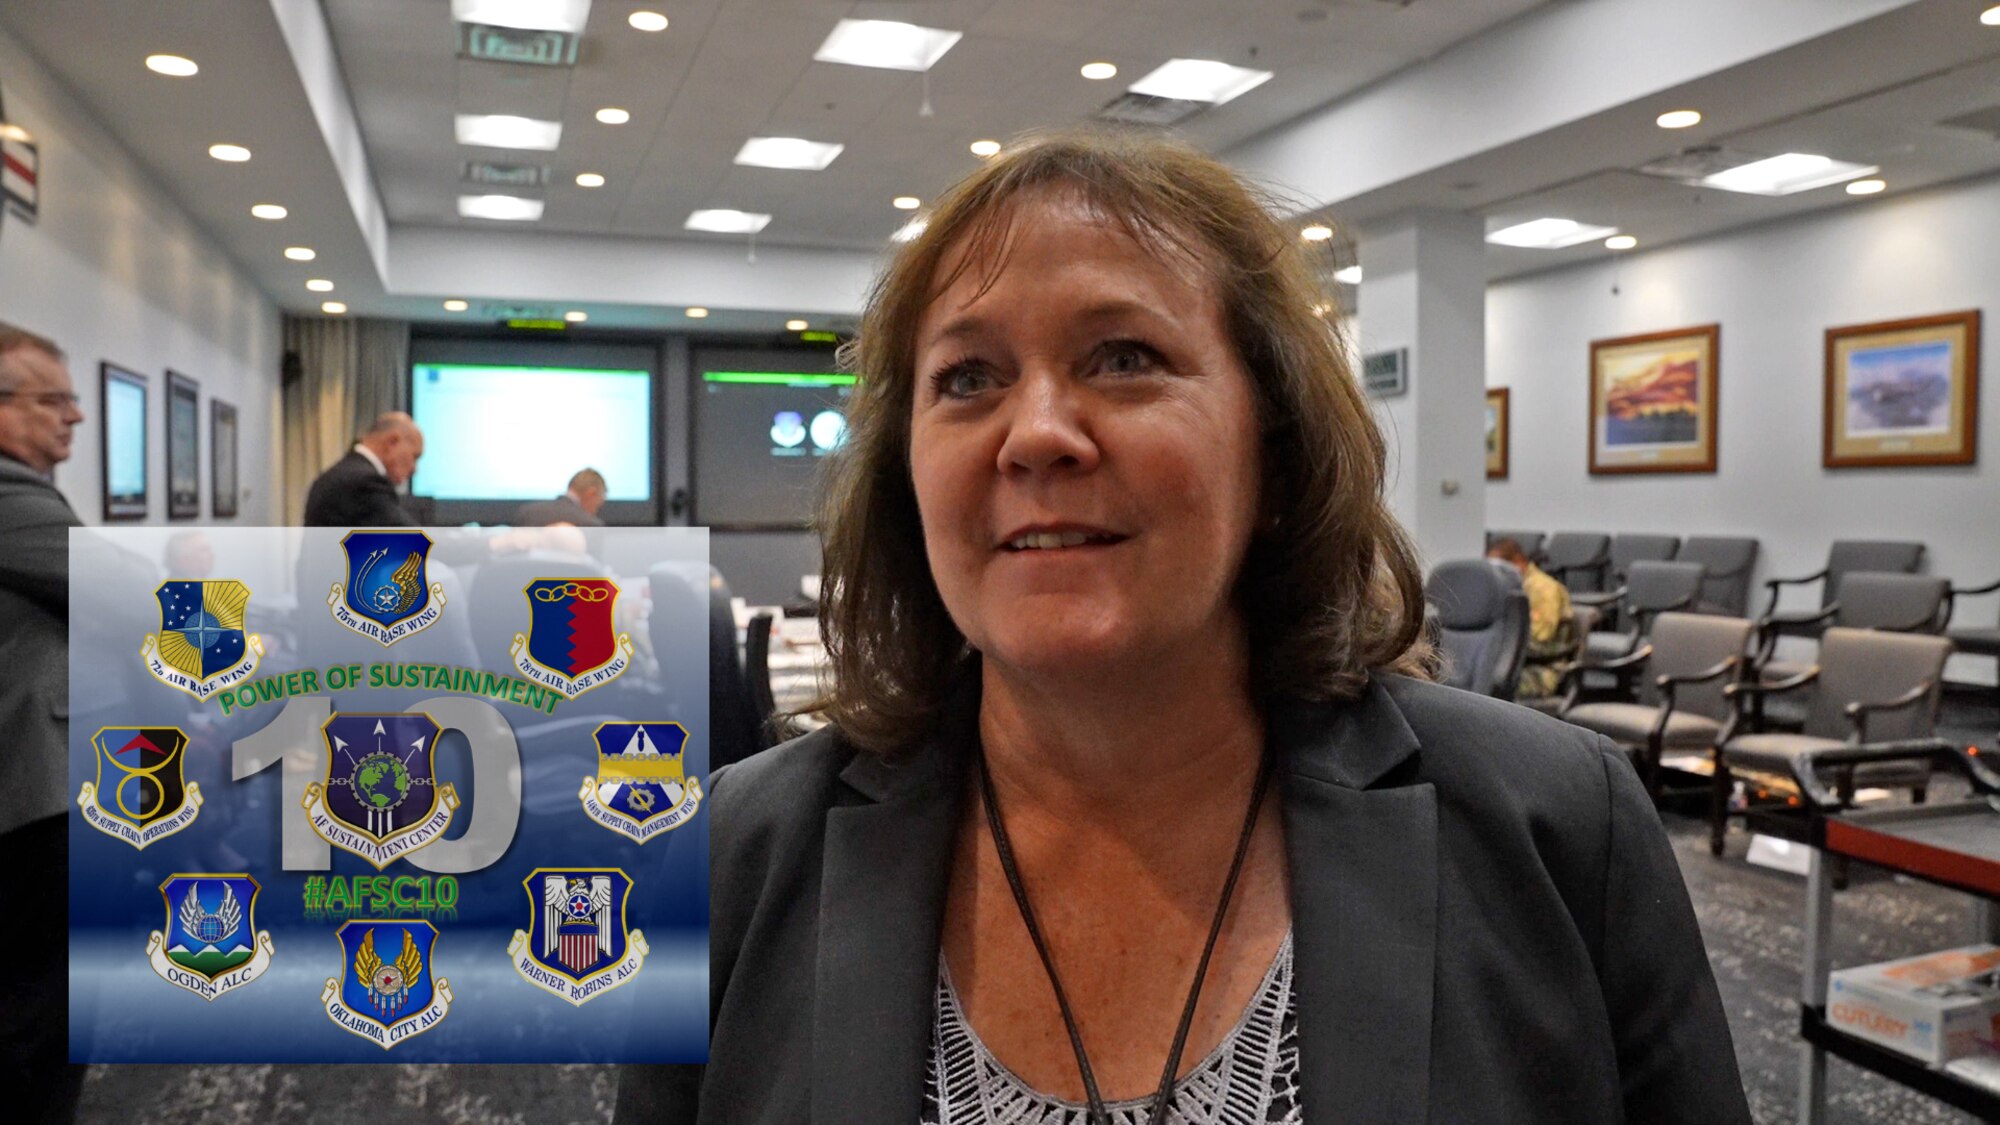 During the AFSC Commander's Summit, April 12 and 13, 2022 at Tinker Air Force Base, leaders gave their thoughts about the growth of the Sustainment Center throughout the last 10 years. Hear what former AFSC Small Business Office Director, Tracy Nicholson, had to say in this video.